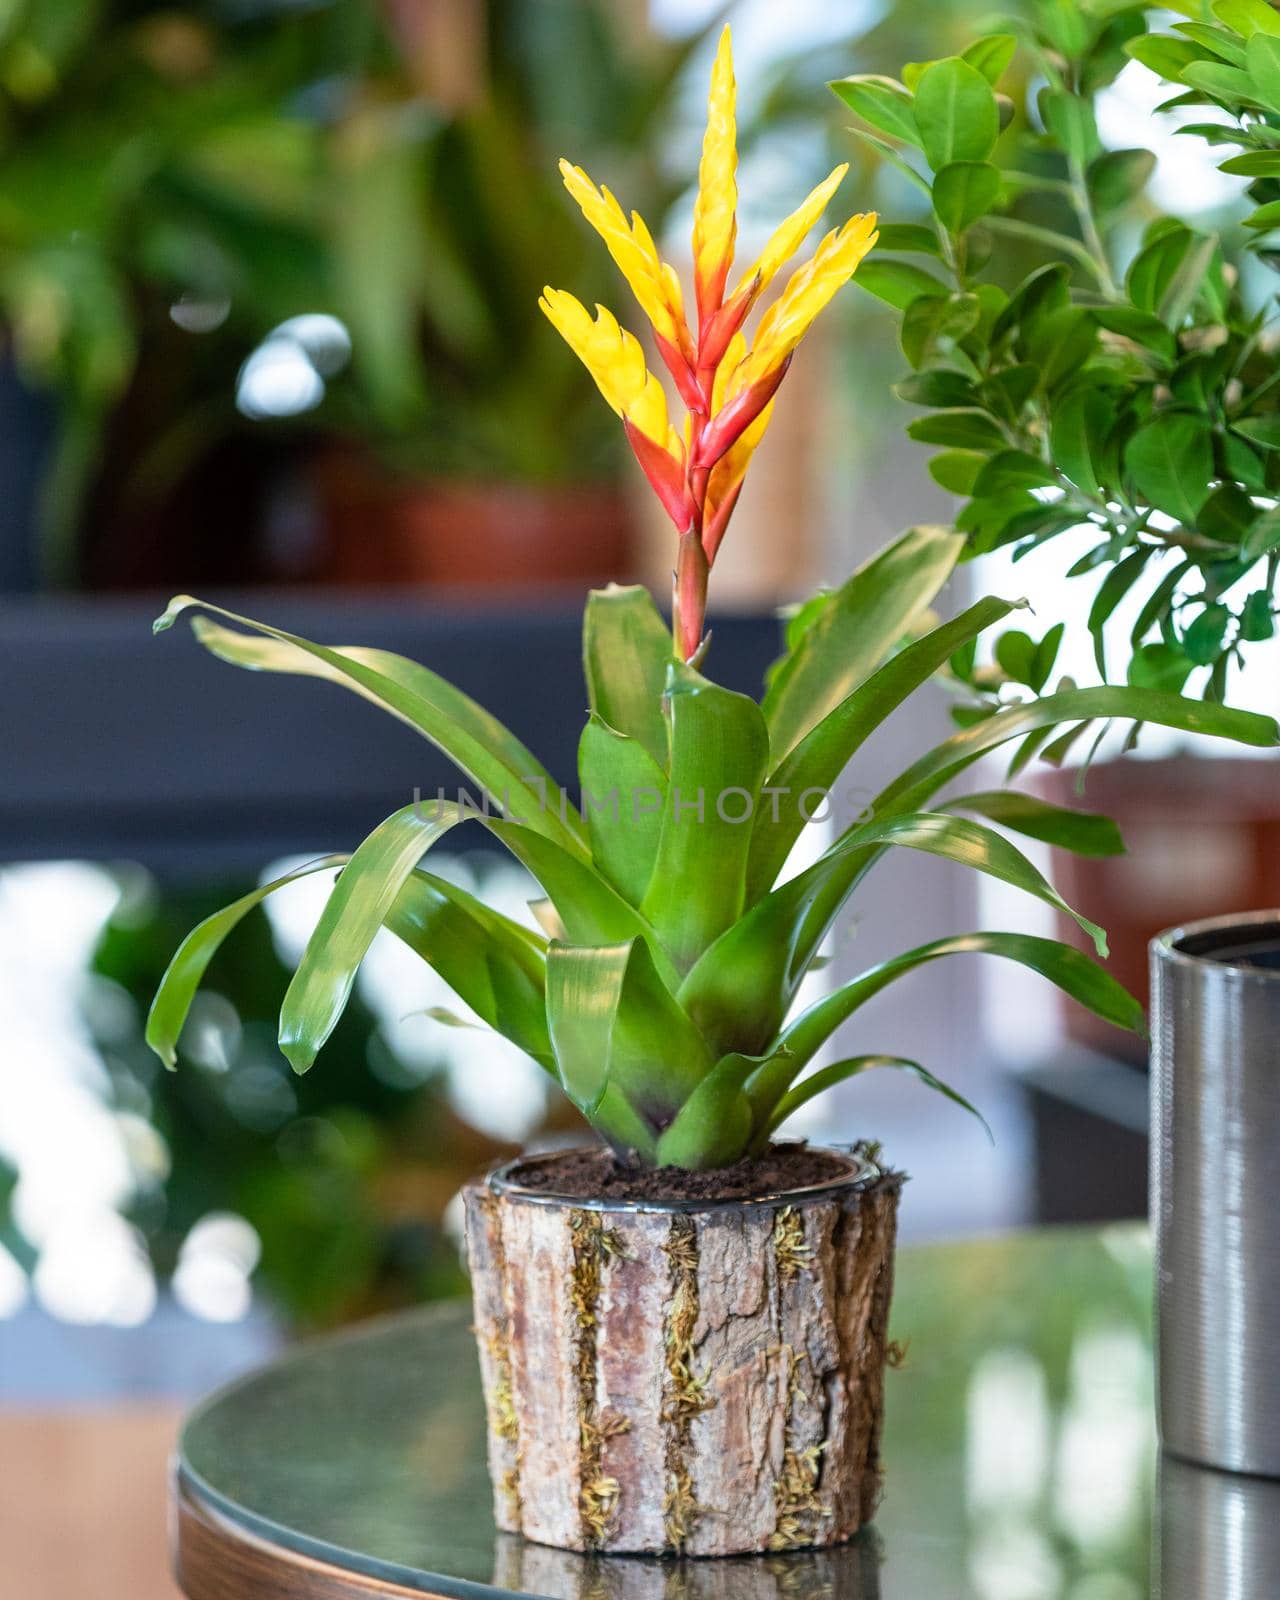 Red Bromeliad flower plant in the wooden pot